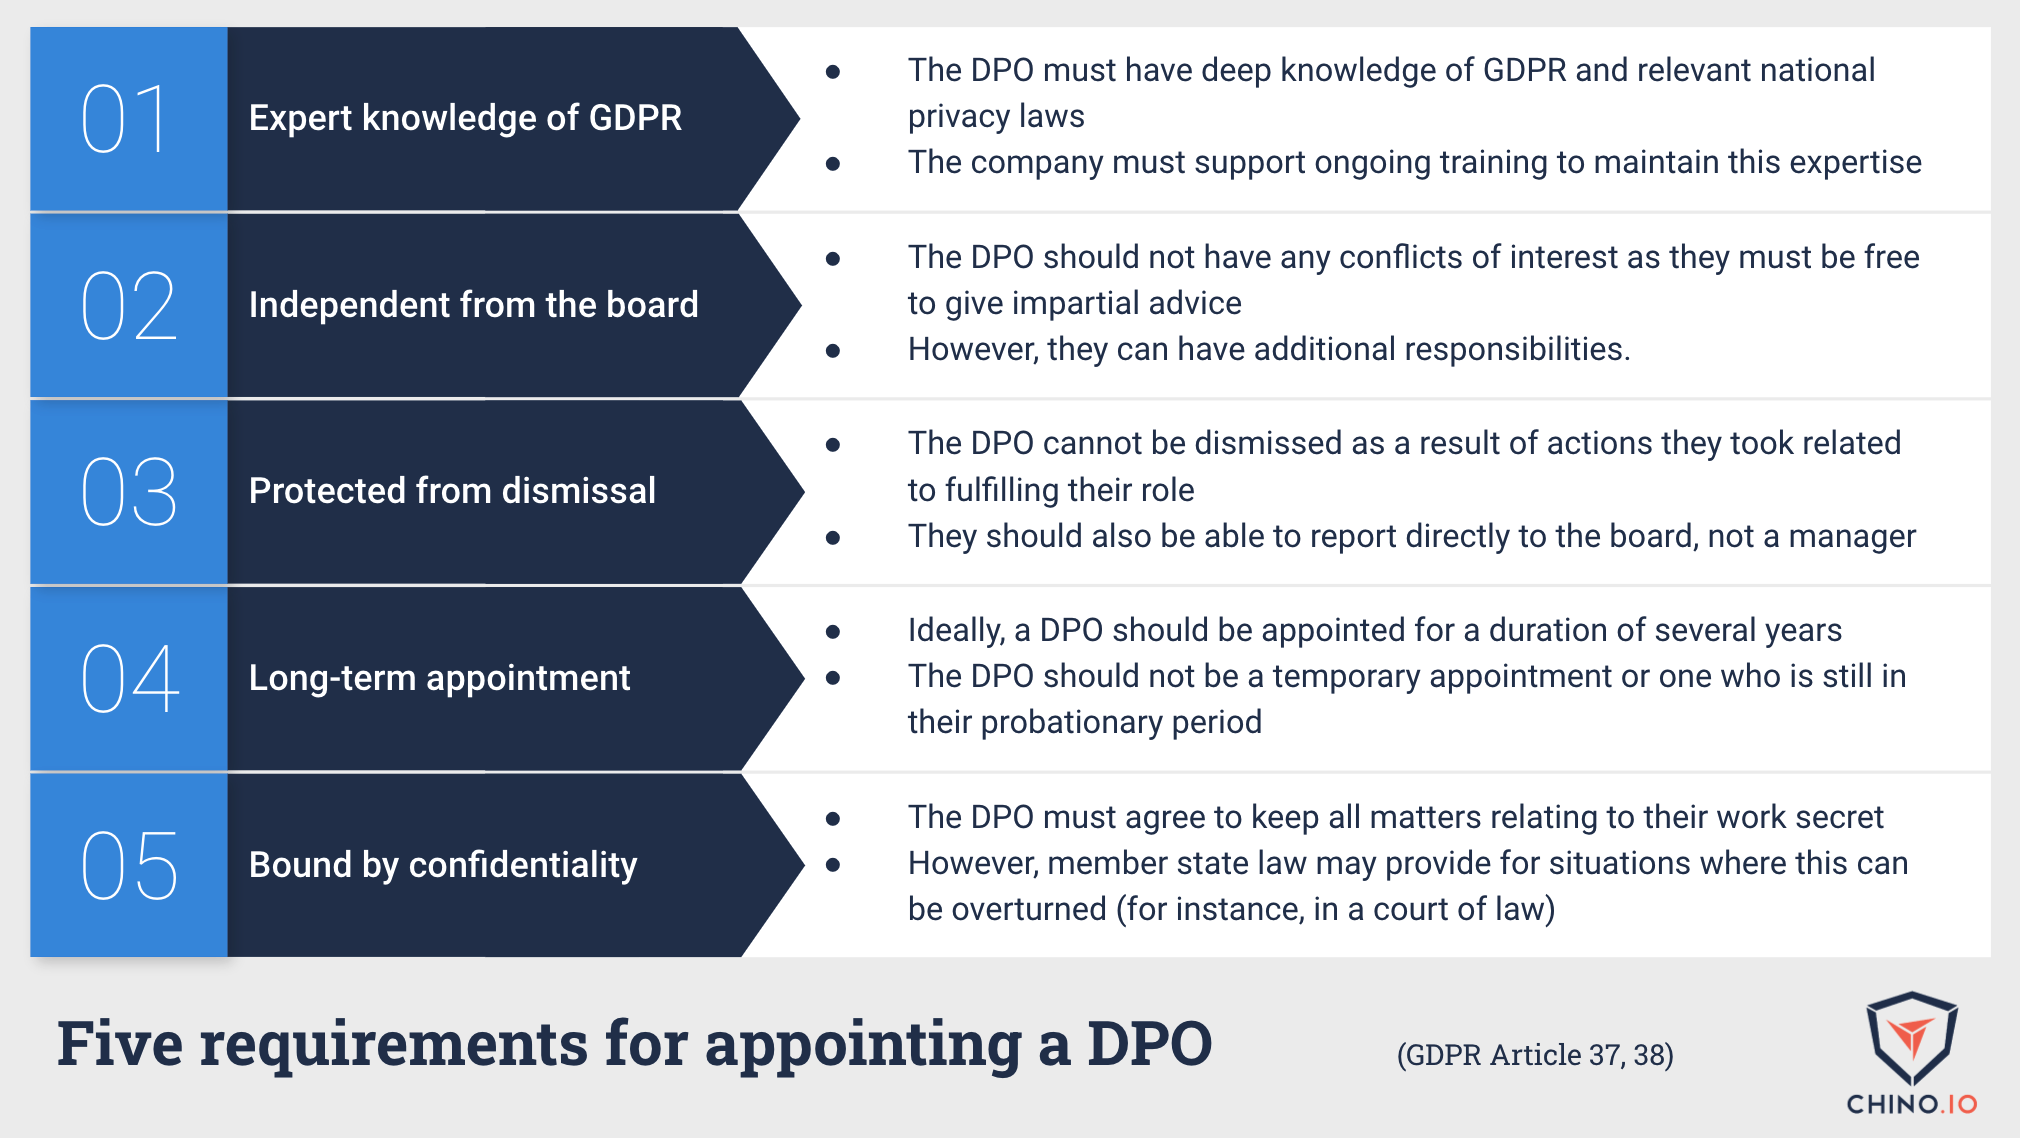 5 requirements for appointing a DPO